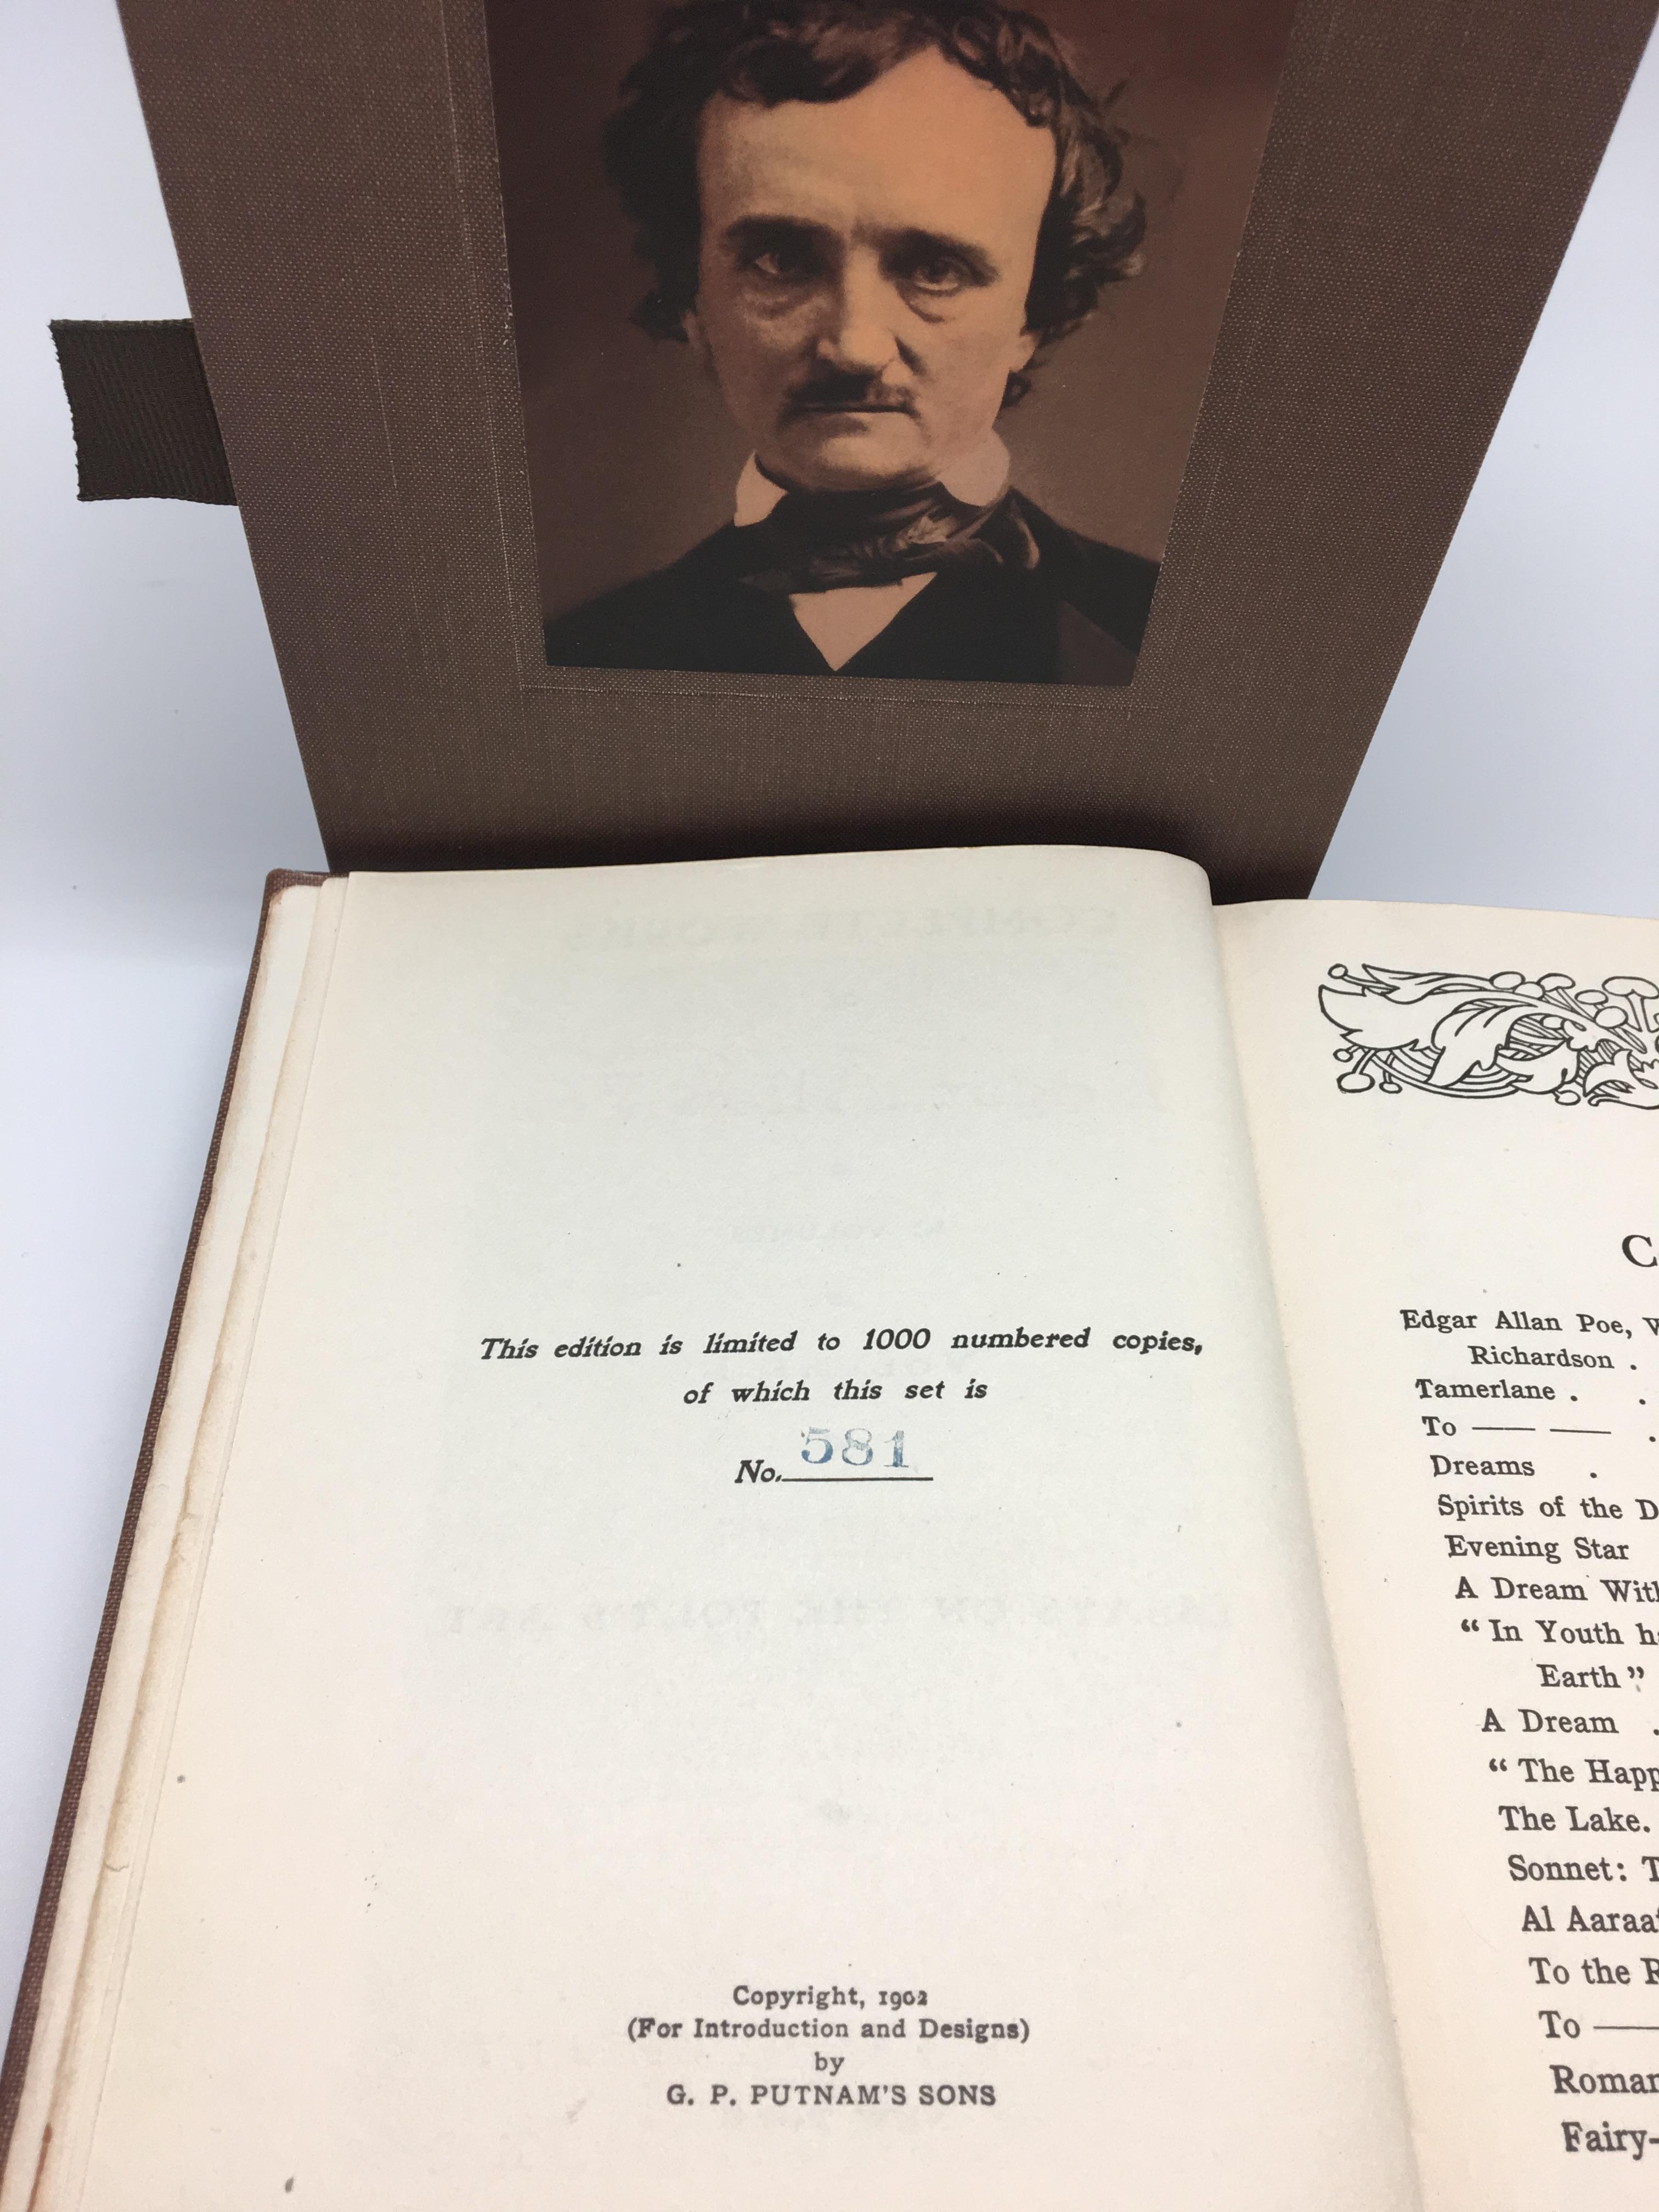 Poe, Edgar Allan, The Complete Works of Edgar Allan Poe, Limited edition #581/1000, Ten volume set. New York: Fred de Fau and Co., 1902. Original brown cloth boards, brown slipcase

Presented is the ten volume set of The Complete Works of Edgar